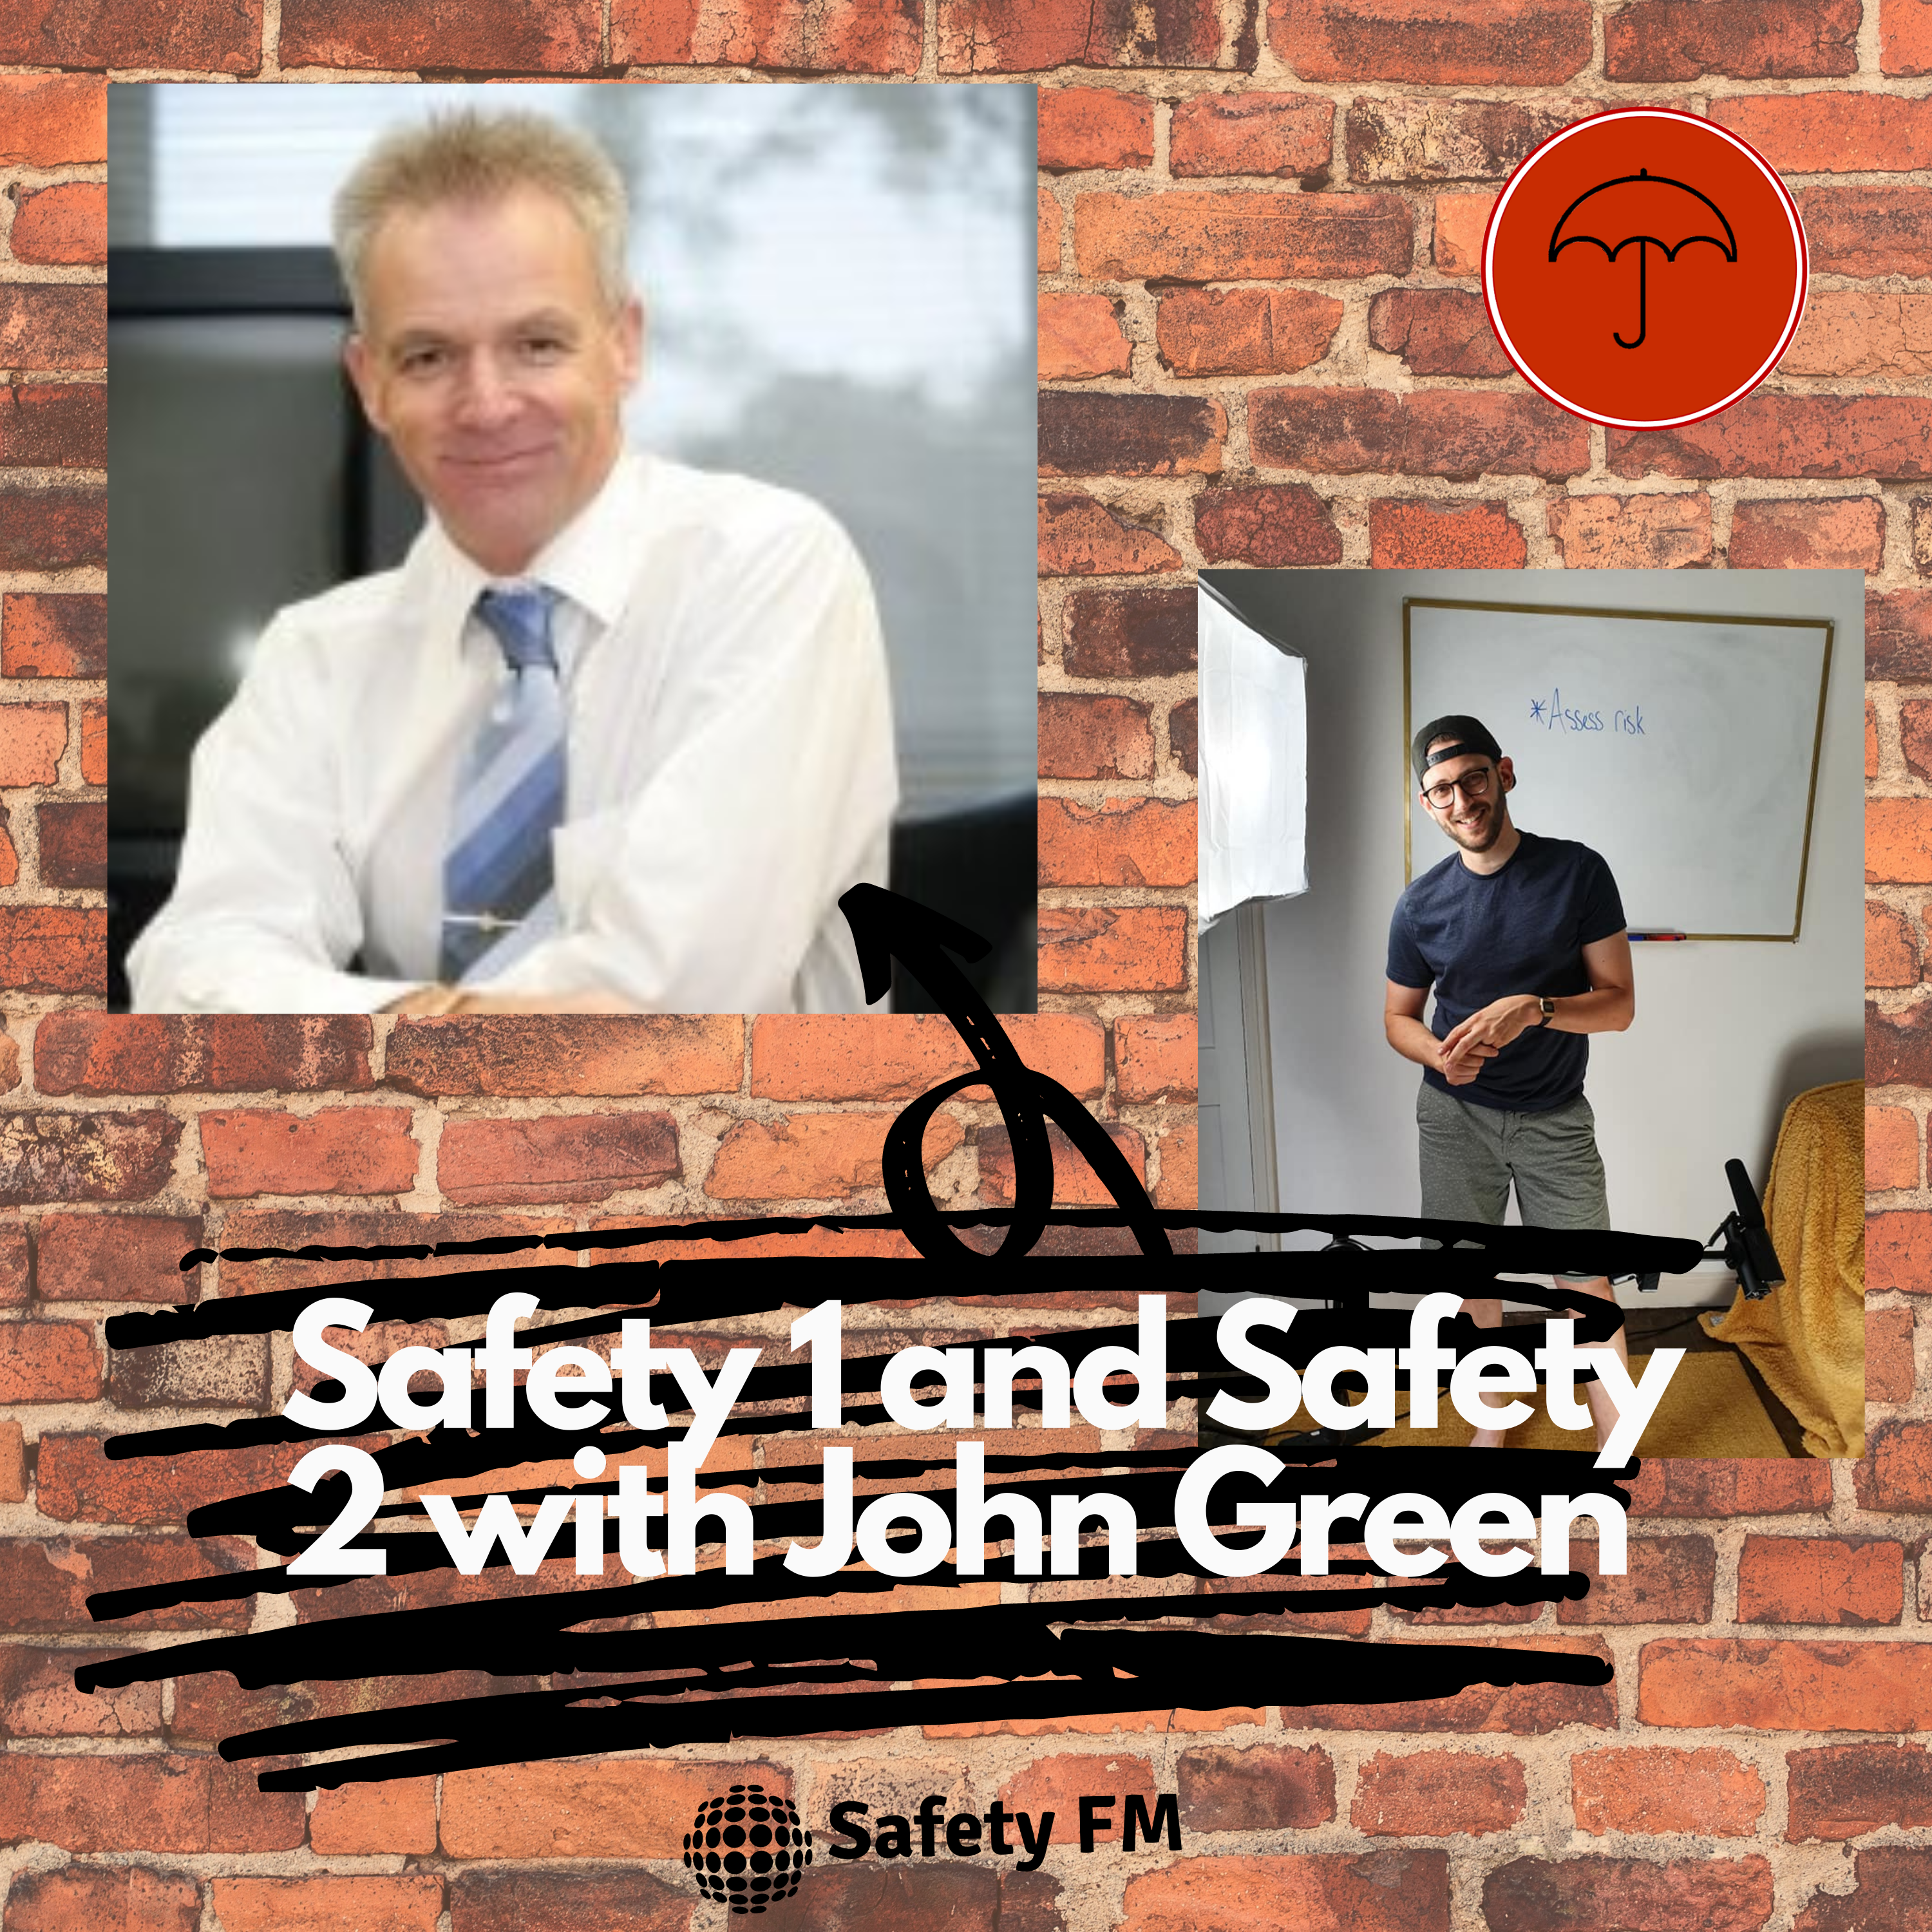 Safety 1 and Safety 2 with John Green